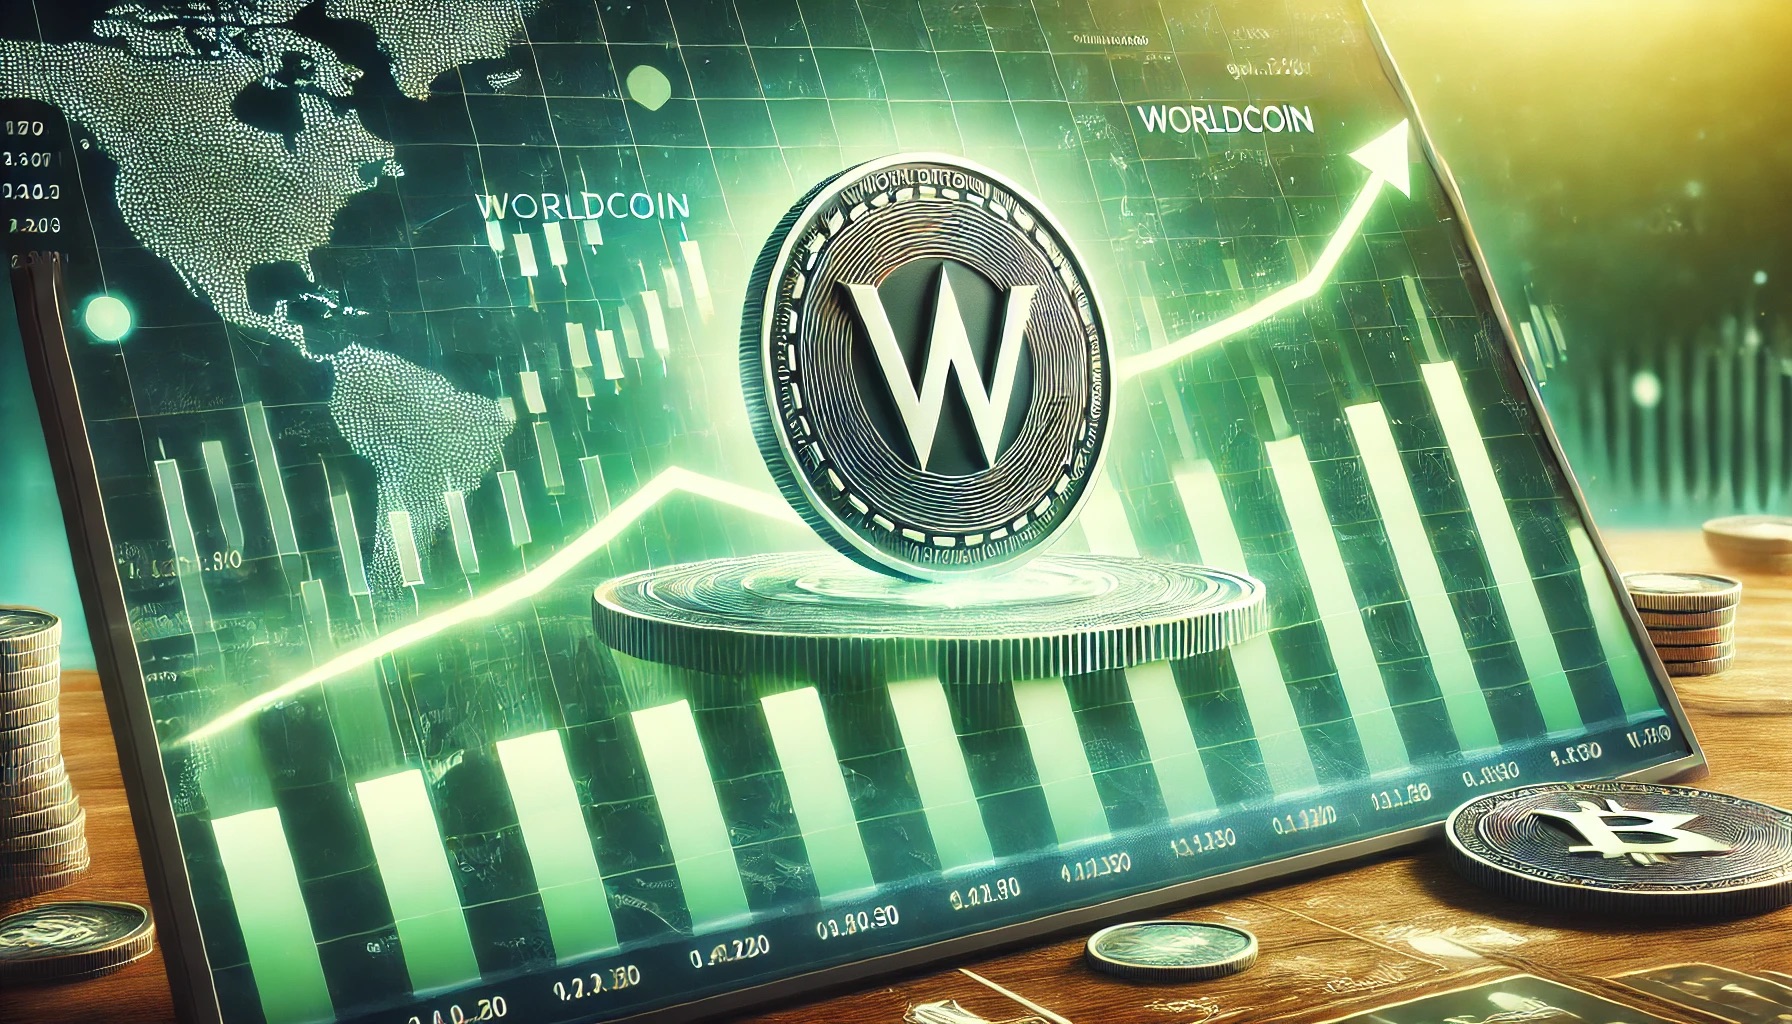 Here’s Why The Worldcoin (WLD) Price Surged Over 15% In One Day To Reach $3